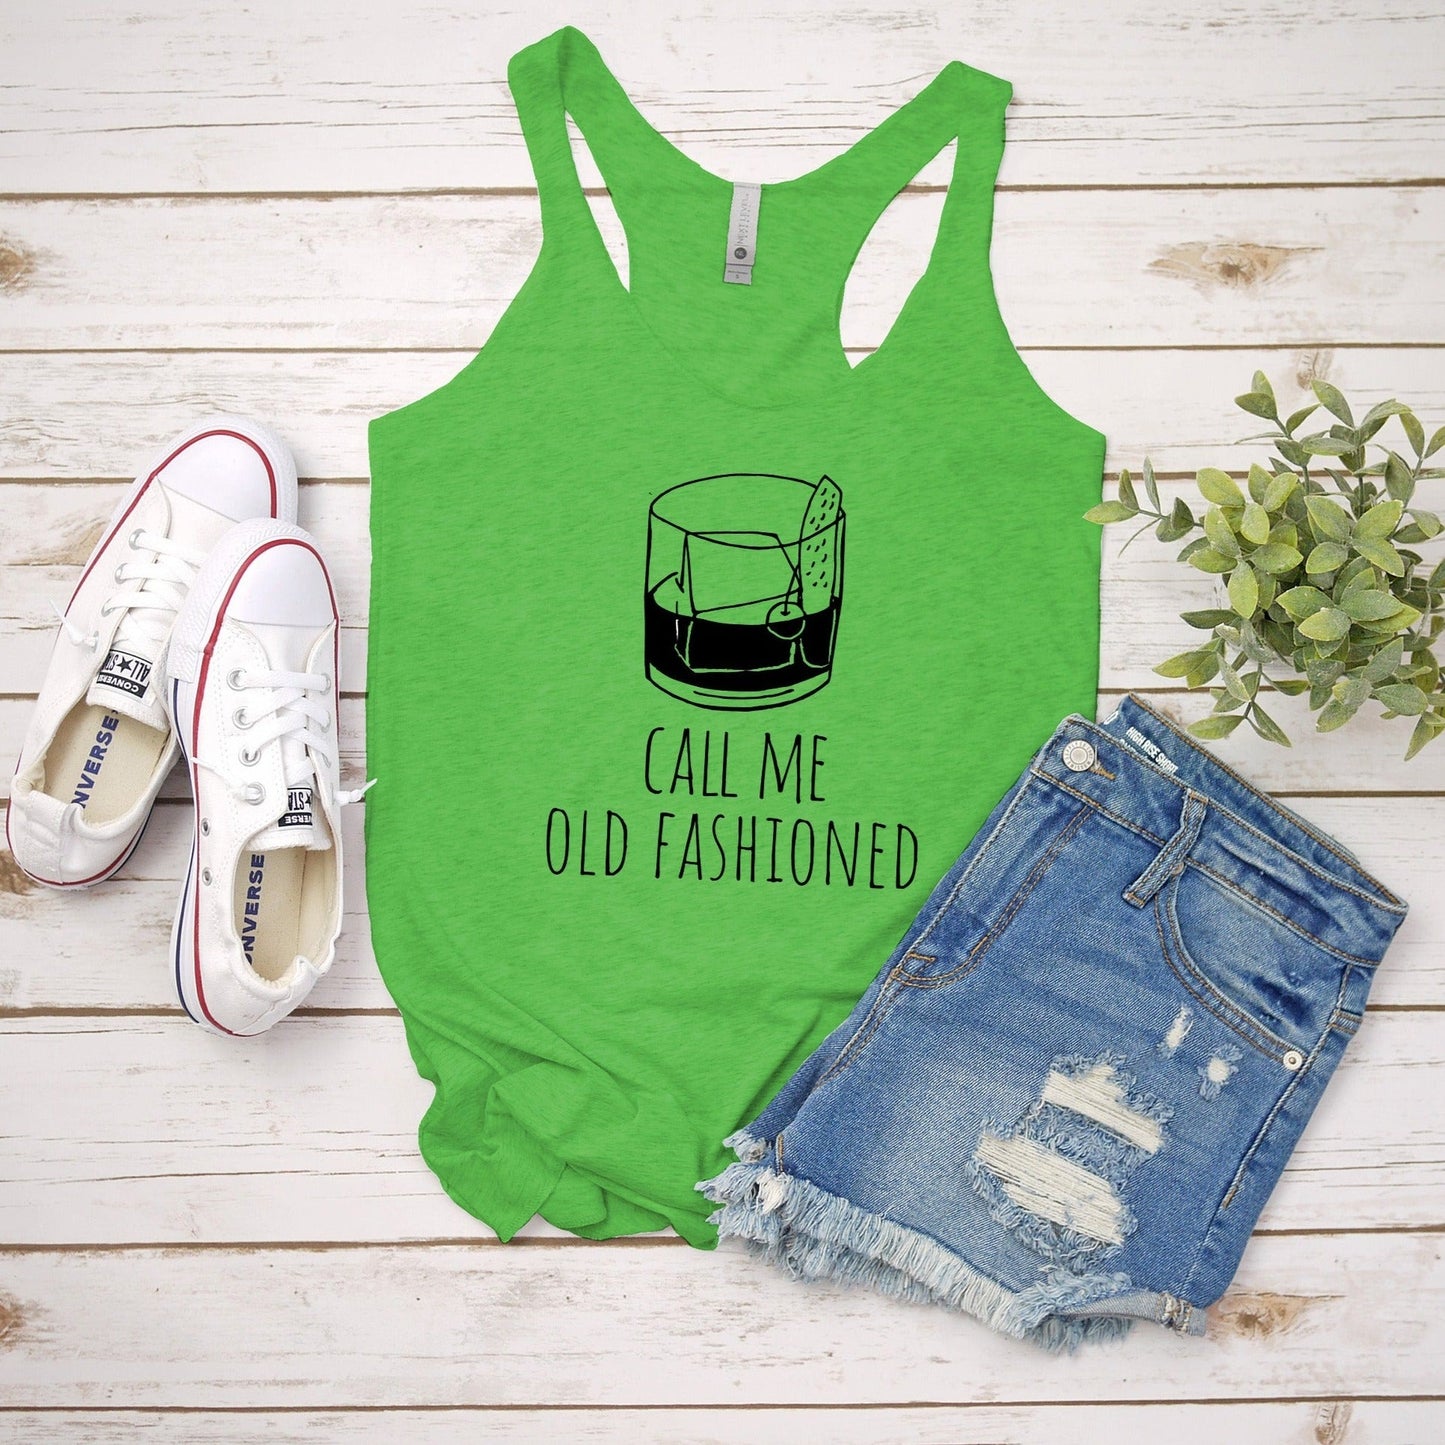 Call Me Old Fashioned (Bourbon) - Women's Tank - Heather Gray, Tahiti, or Envy